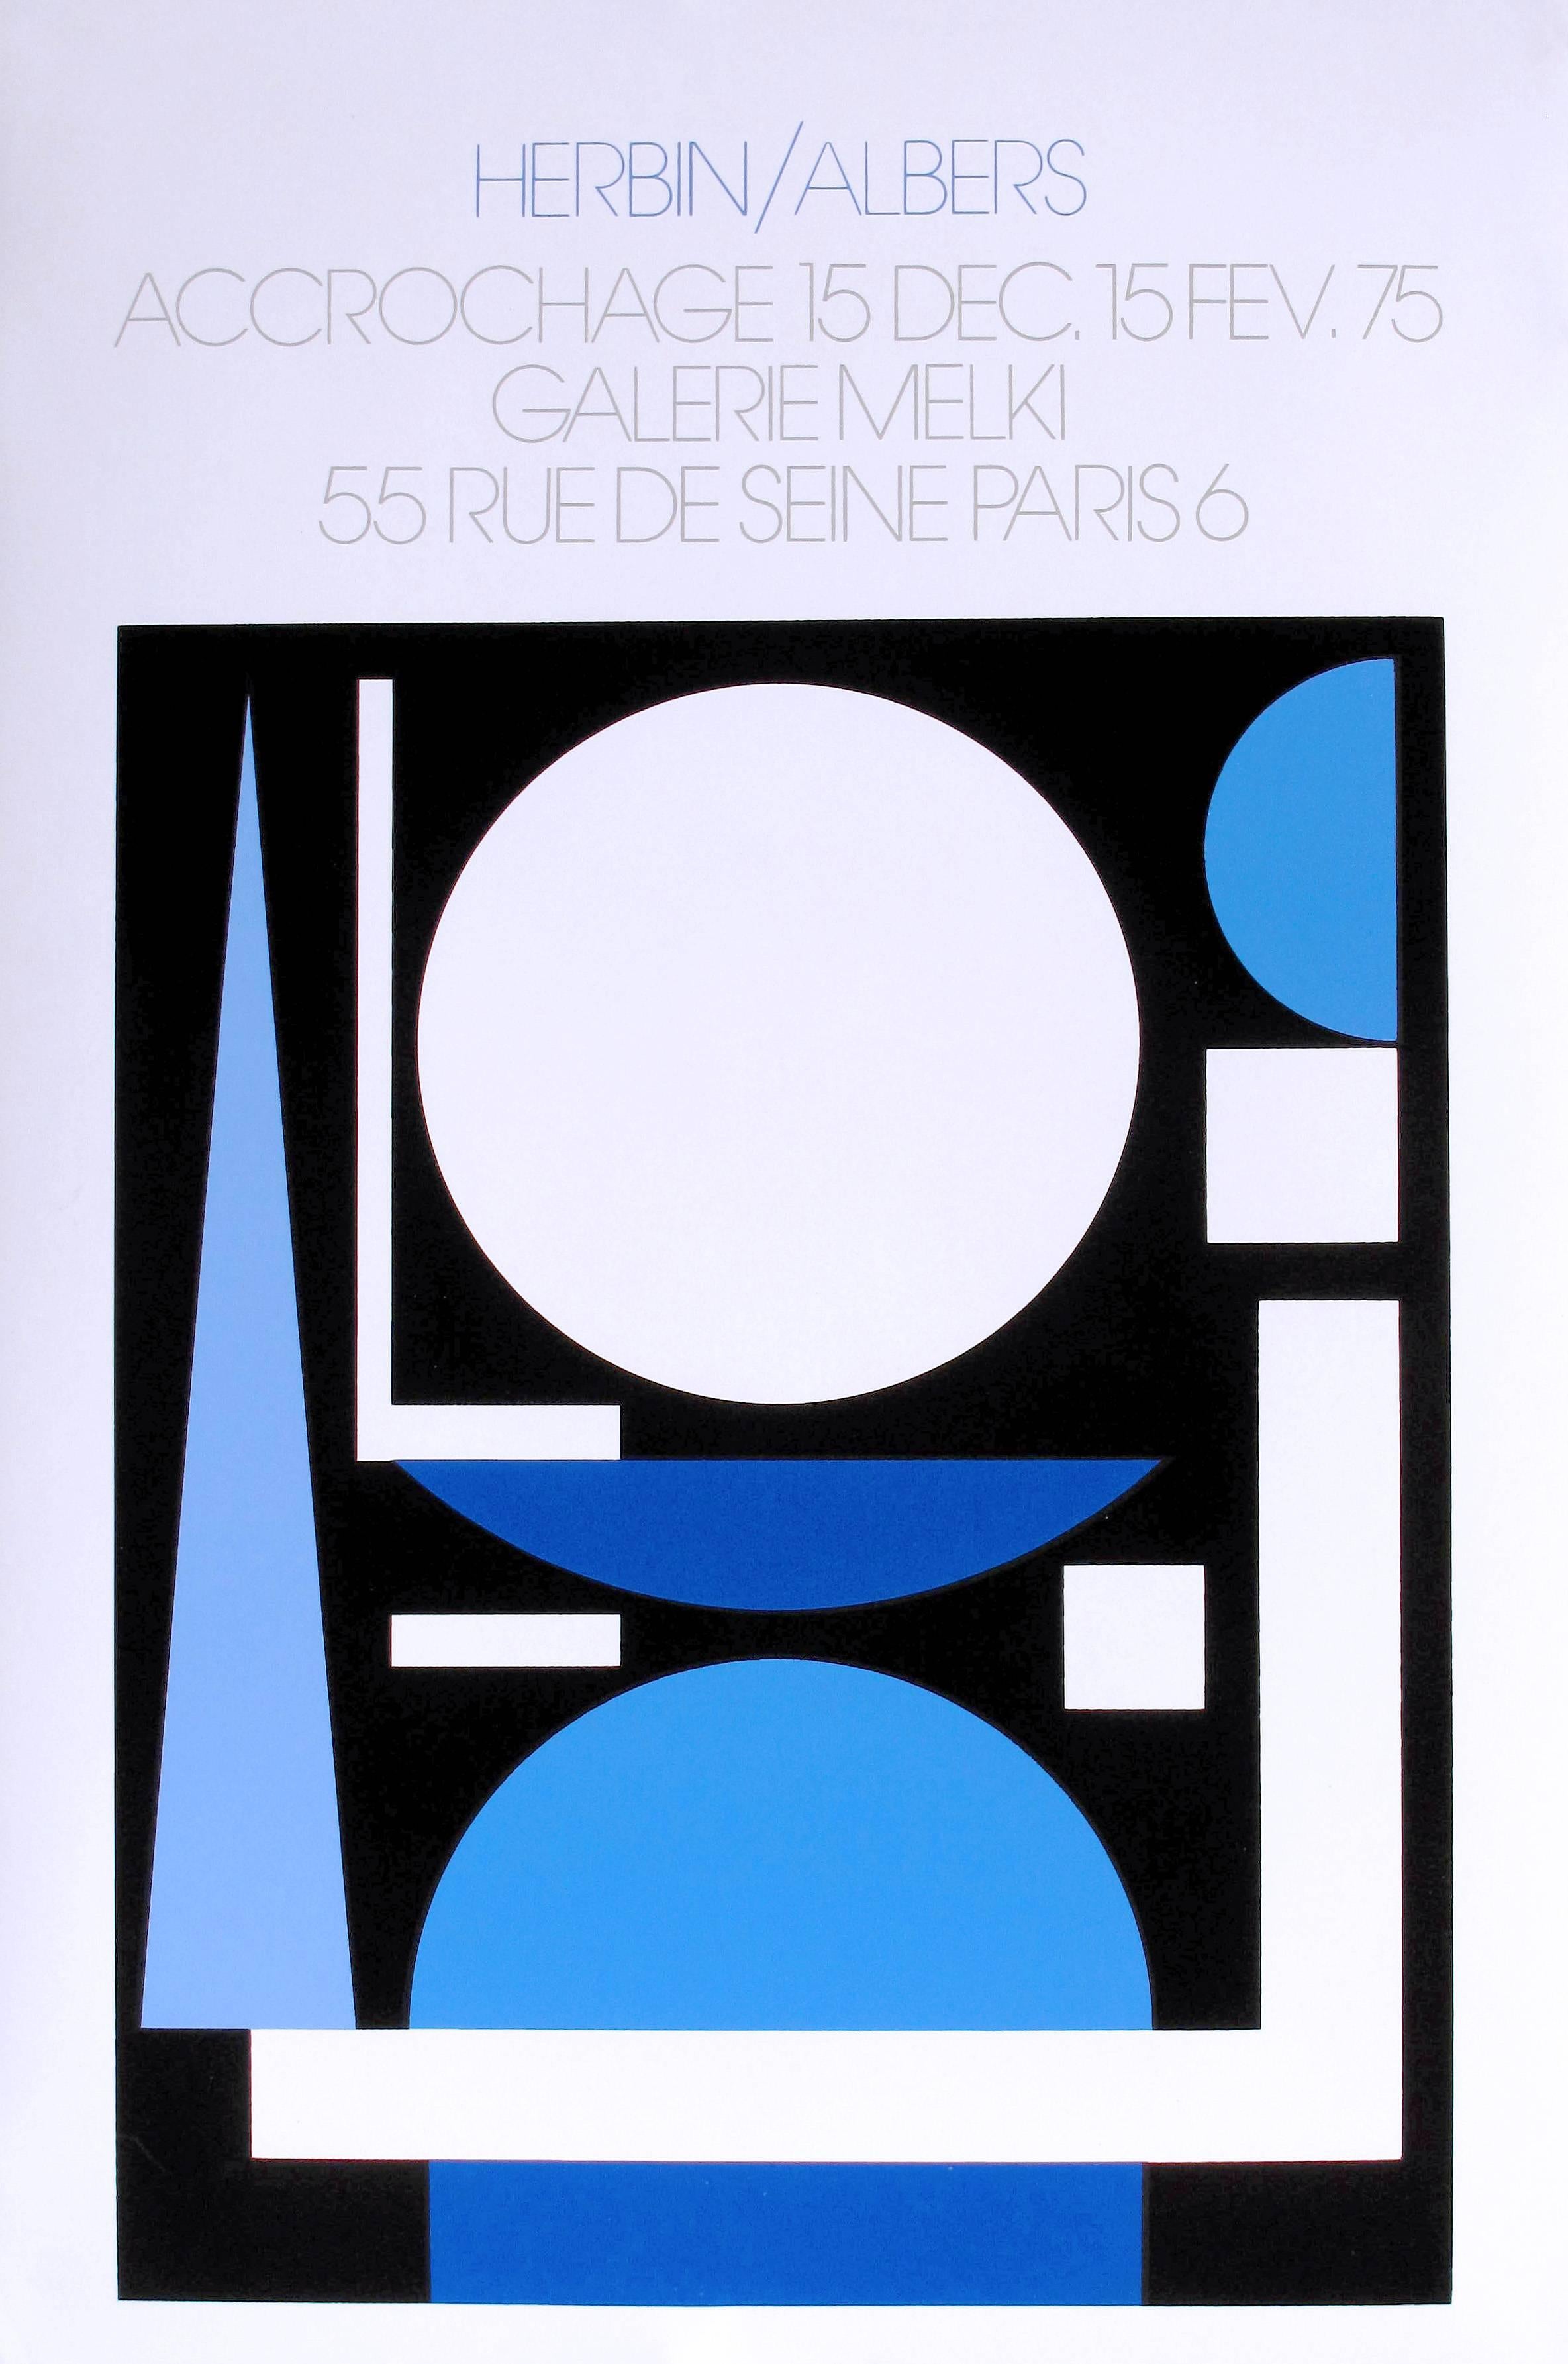 Auguste Herbin and Josef Albers, Galerie Melki, 1975
An original color screen print exhibition poster by Auguste Herbin titled published and printed in Paris for a unique joint exhibition at Galerie Melki in 1975. Rich, elegant vibrant bright colors